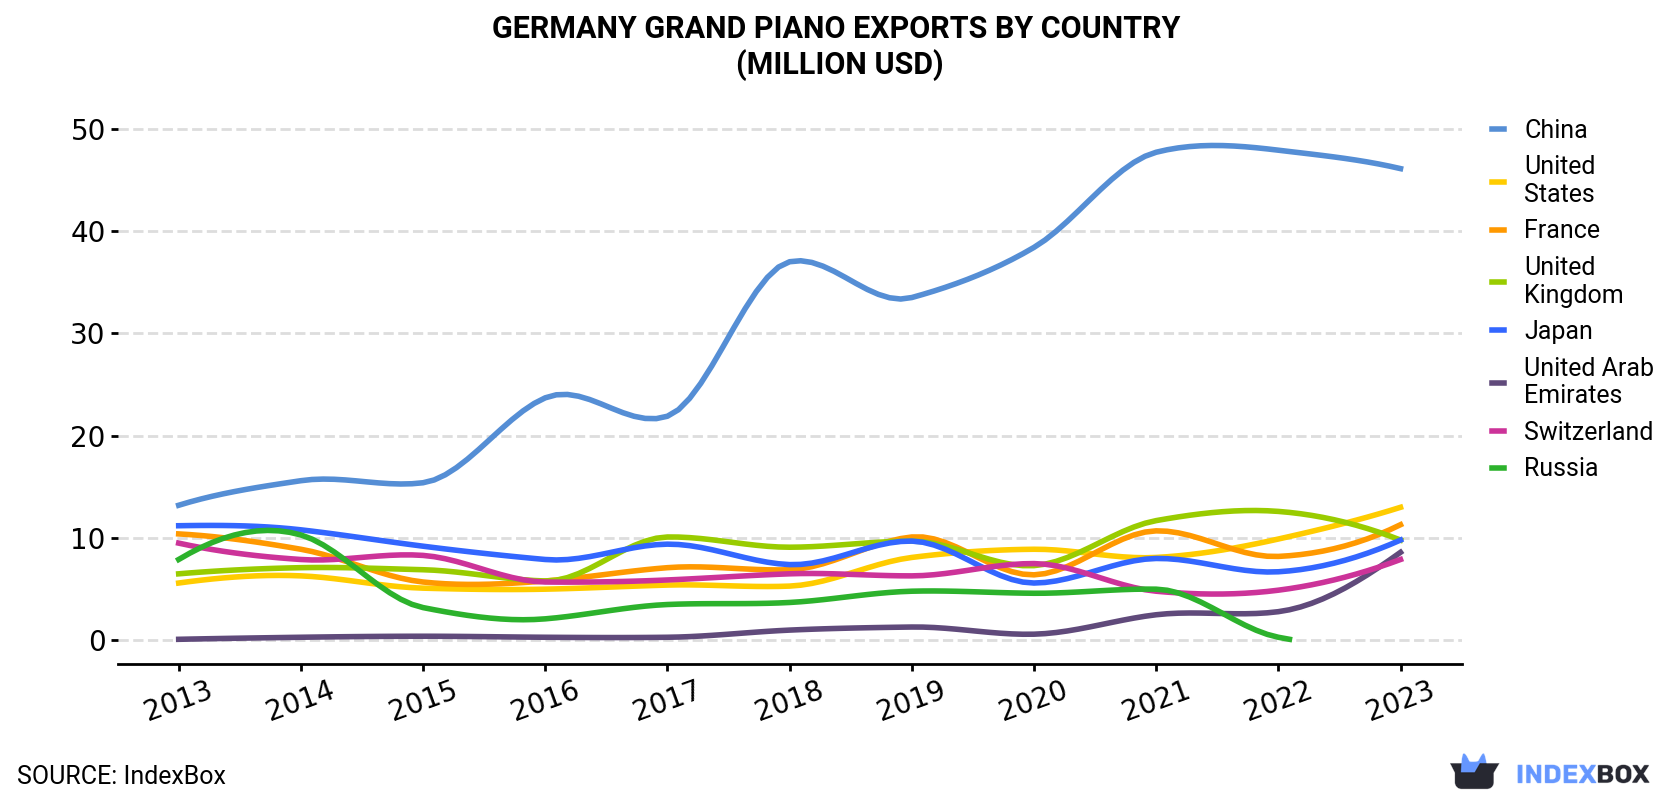 Germany Grand Piano Exports By Country (Million USD)